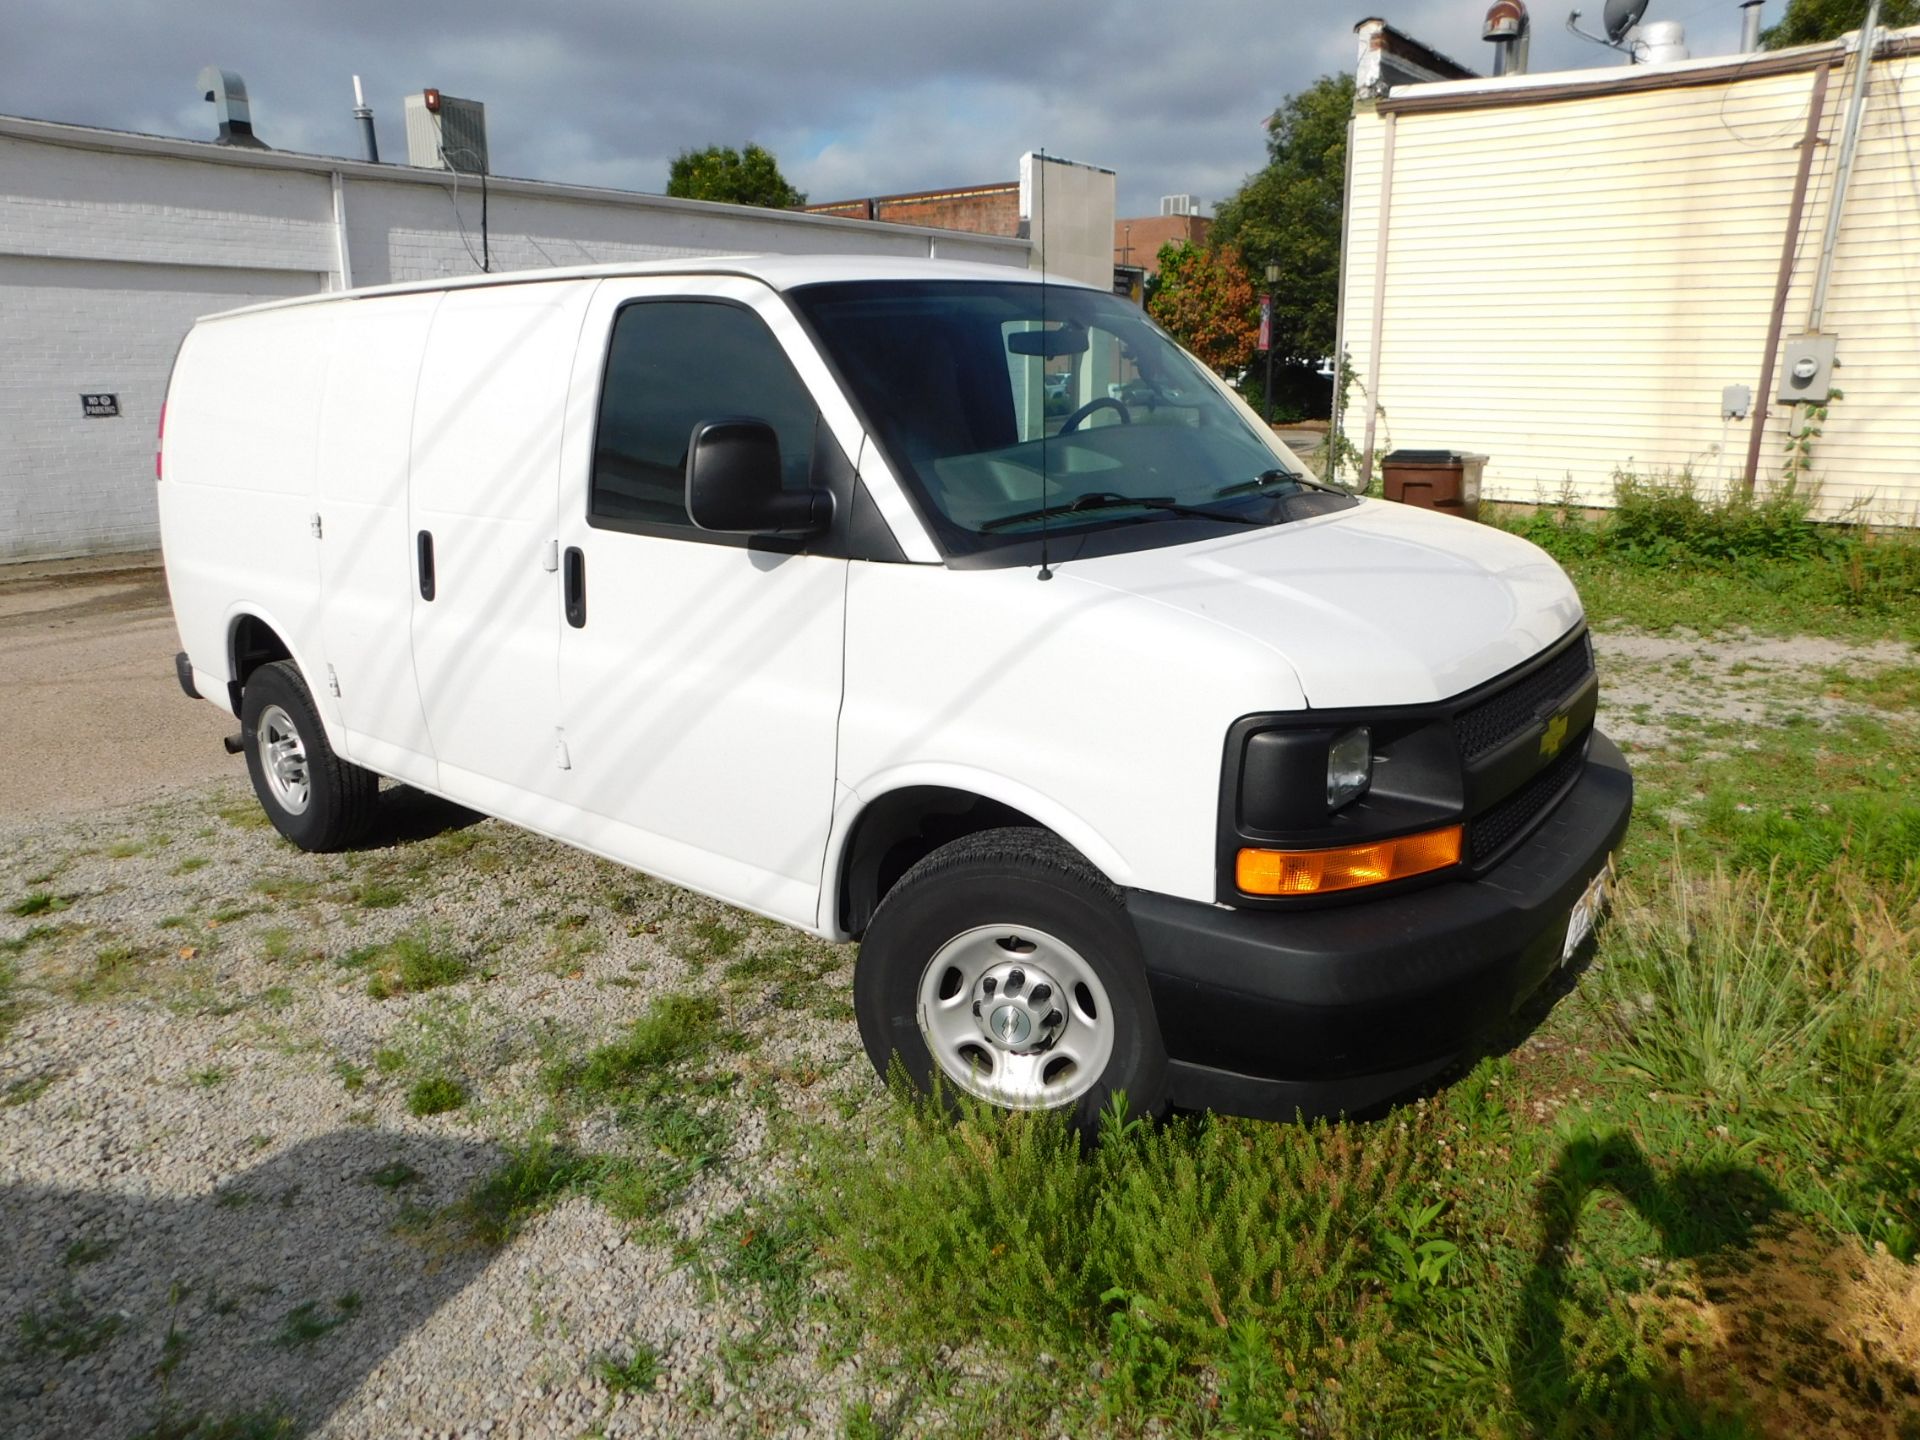 2017 Chevy 2500 Express Cargo Van, 18,100 Miles, L20 4.8L Engine, Gas Hitch, VIN 1GCWGAFF8H1347332 - Image 2 of 12